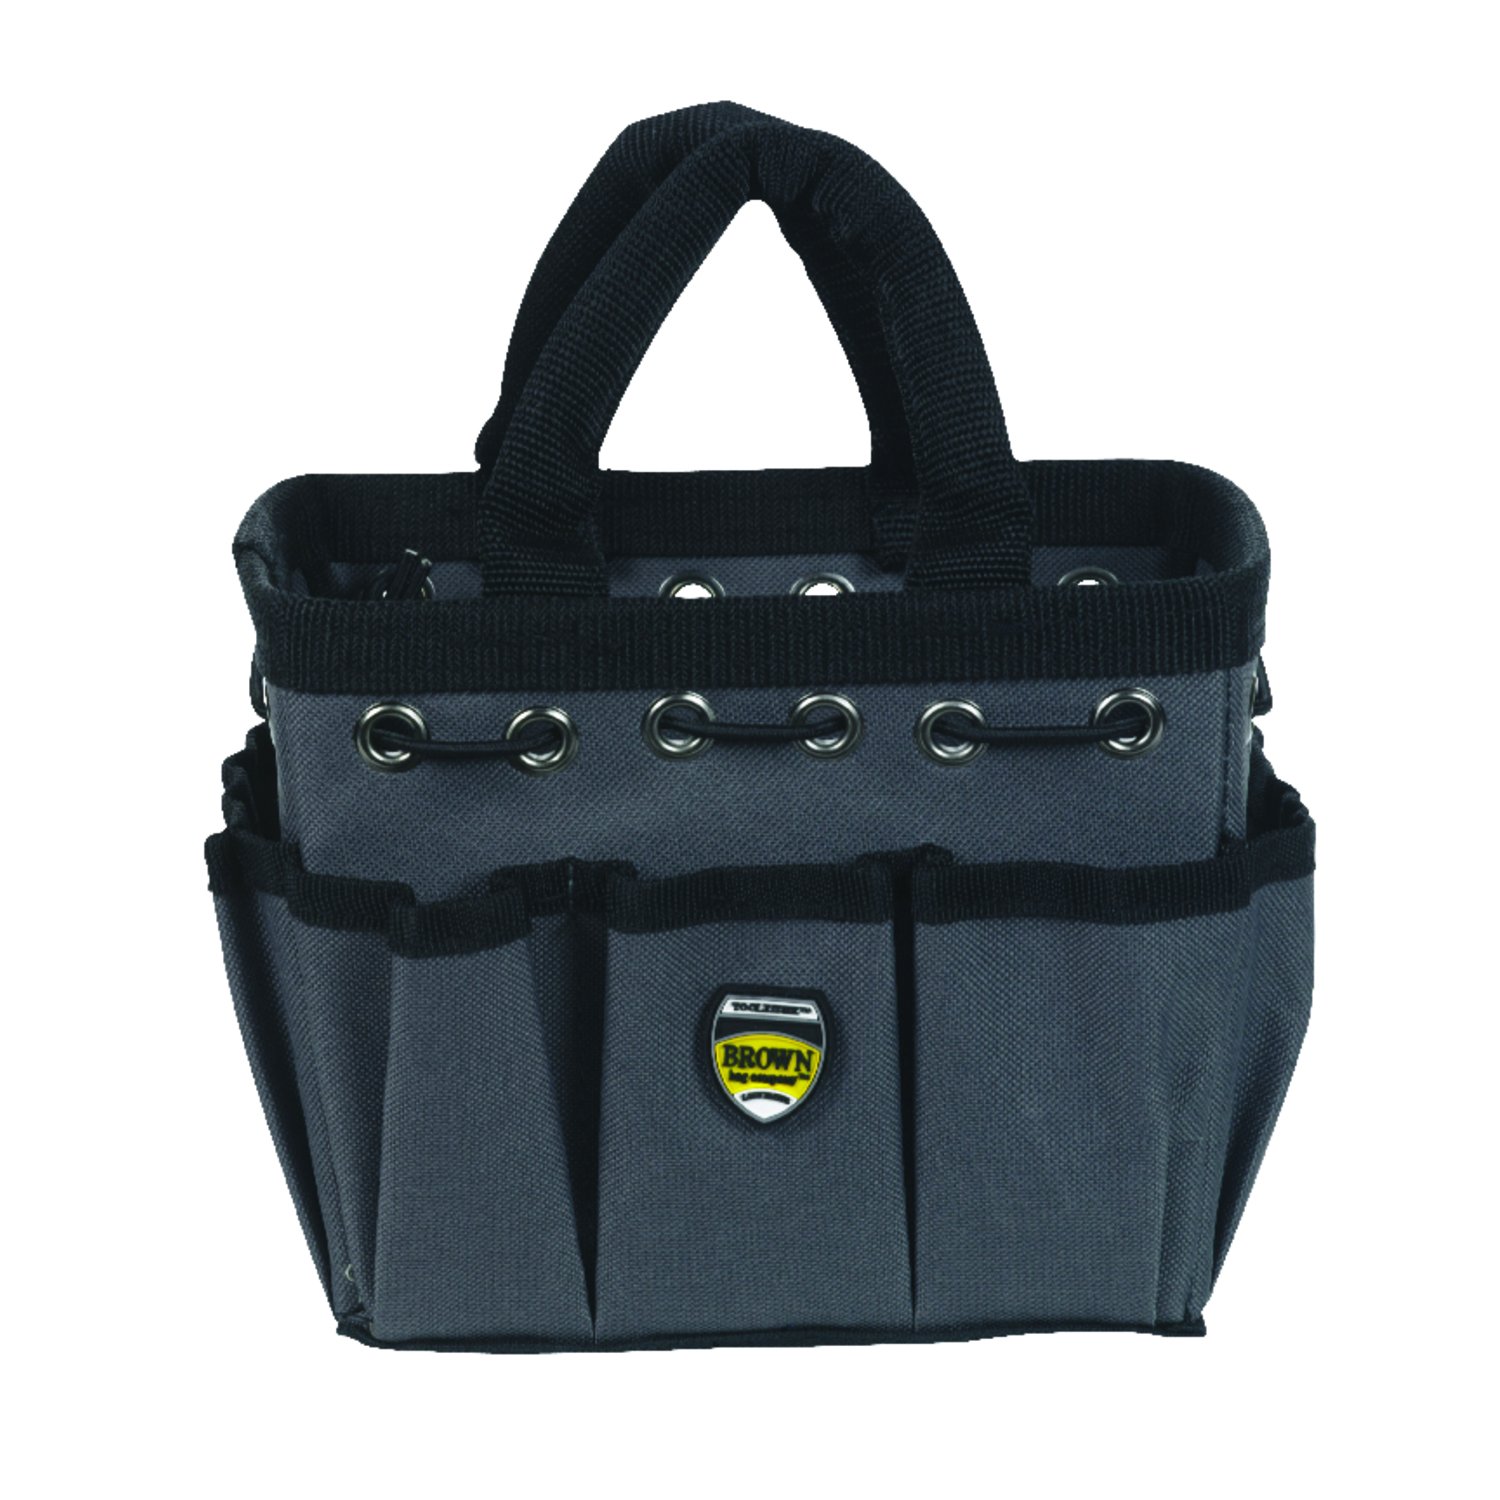 Photos - Tool Box McGuire-Nicholas 4 in. W X 6 in. H Polyester Tool Bag 8 pocket Black 1 pc